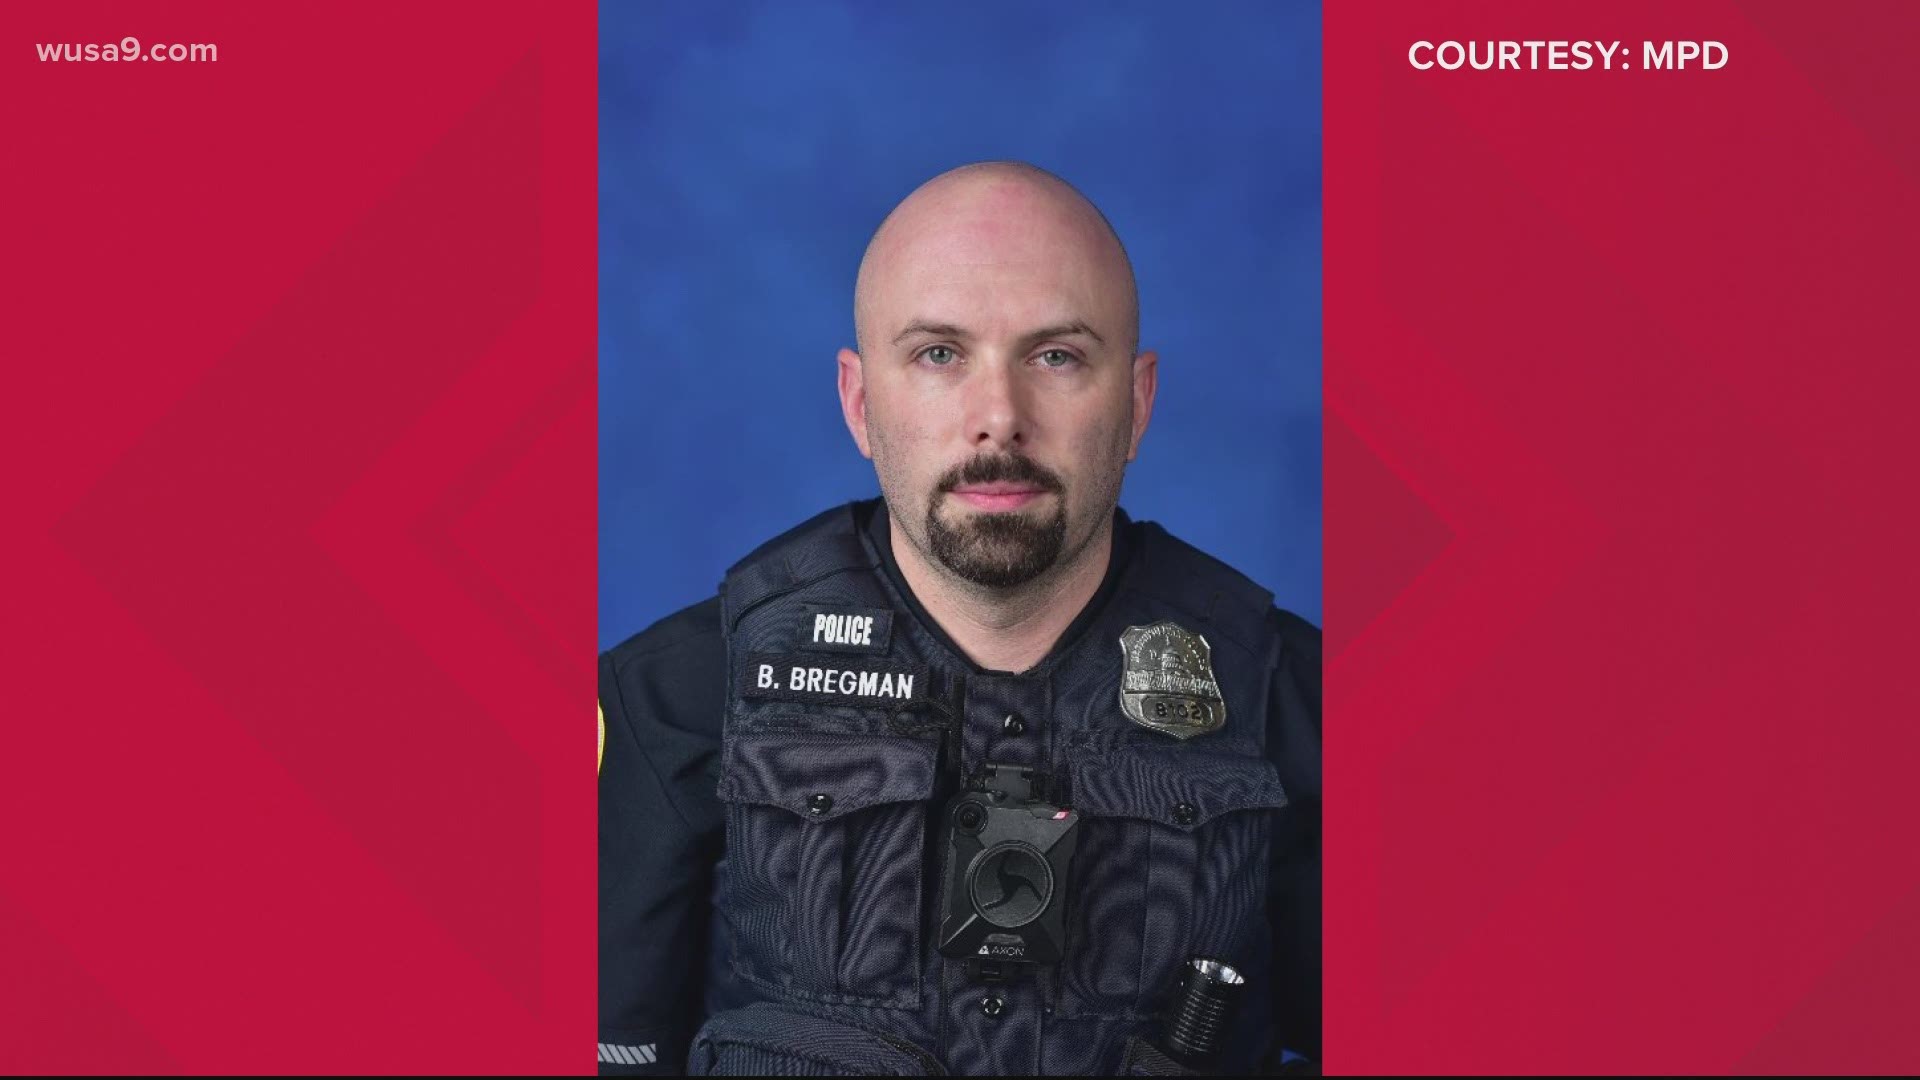 A spokesperson for the Metropolitan Police Department tells WUSA9 that Brian Bregman, 43, served with DC Police for 16 years.